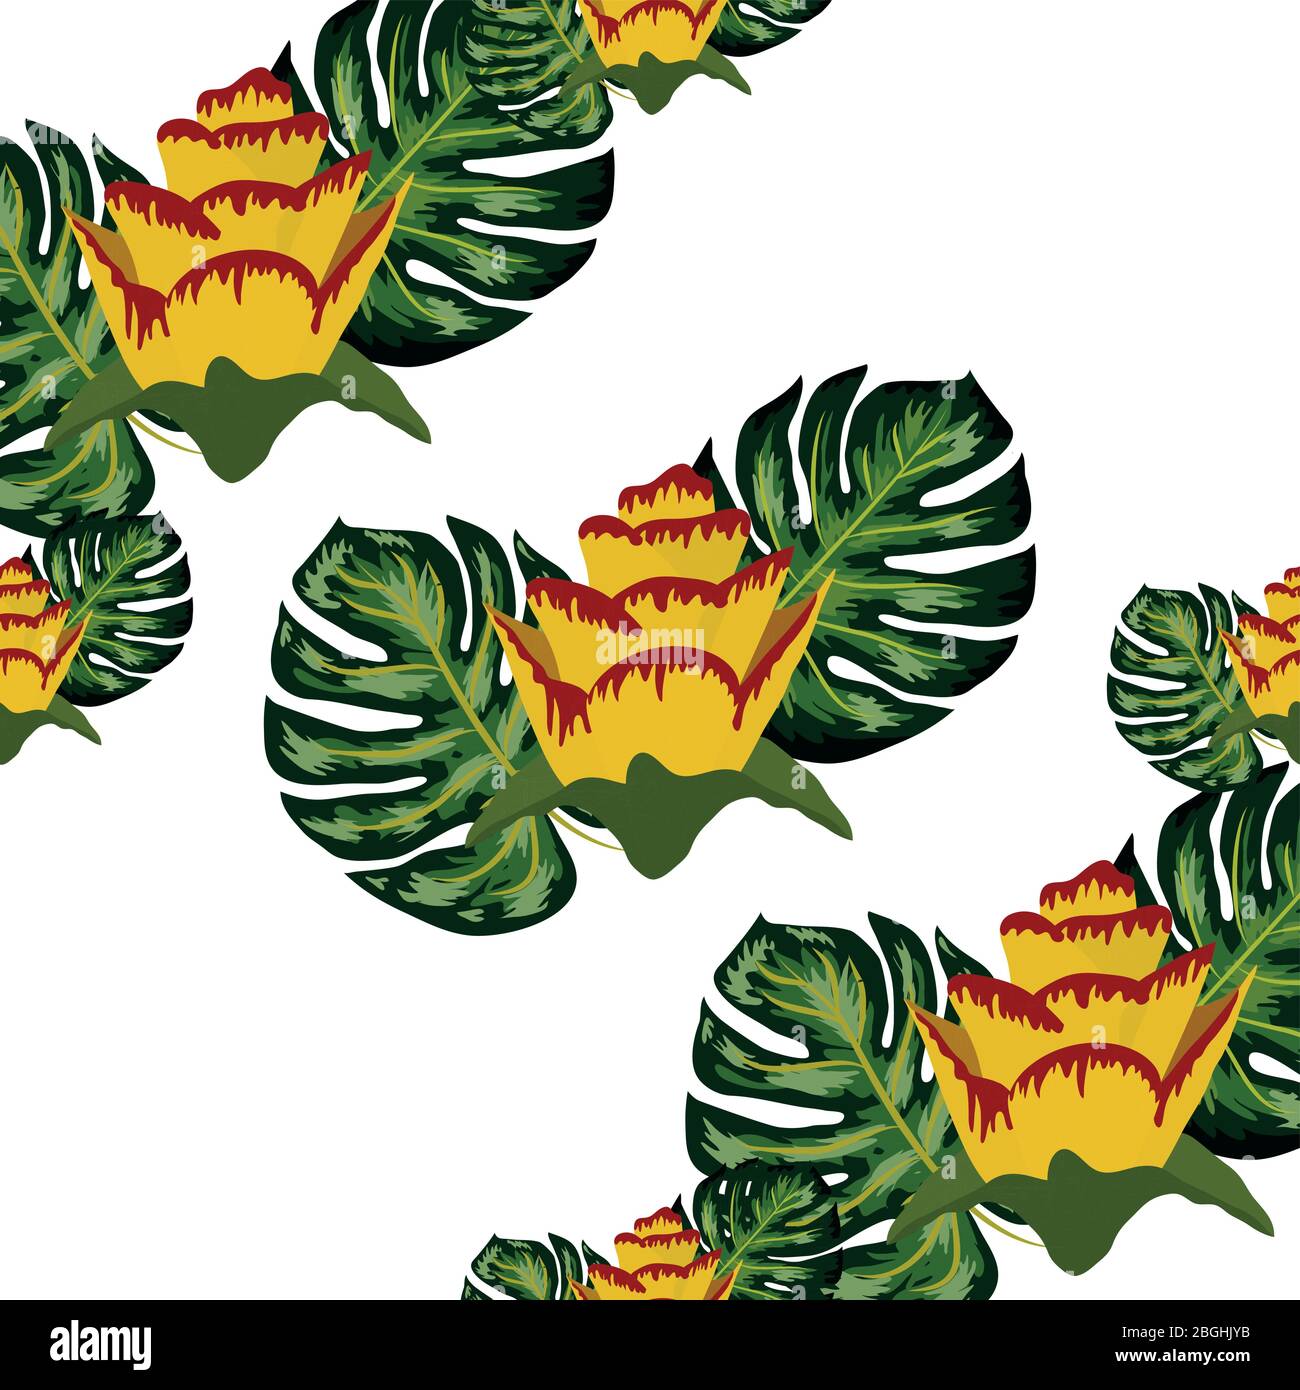 Summer seamless tropical pattern with bright yellow and pink plants and leaves. Stock Vector